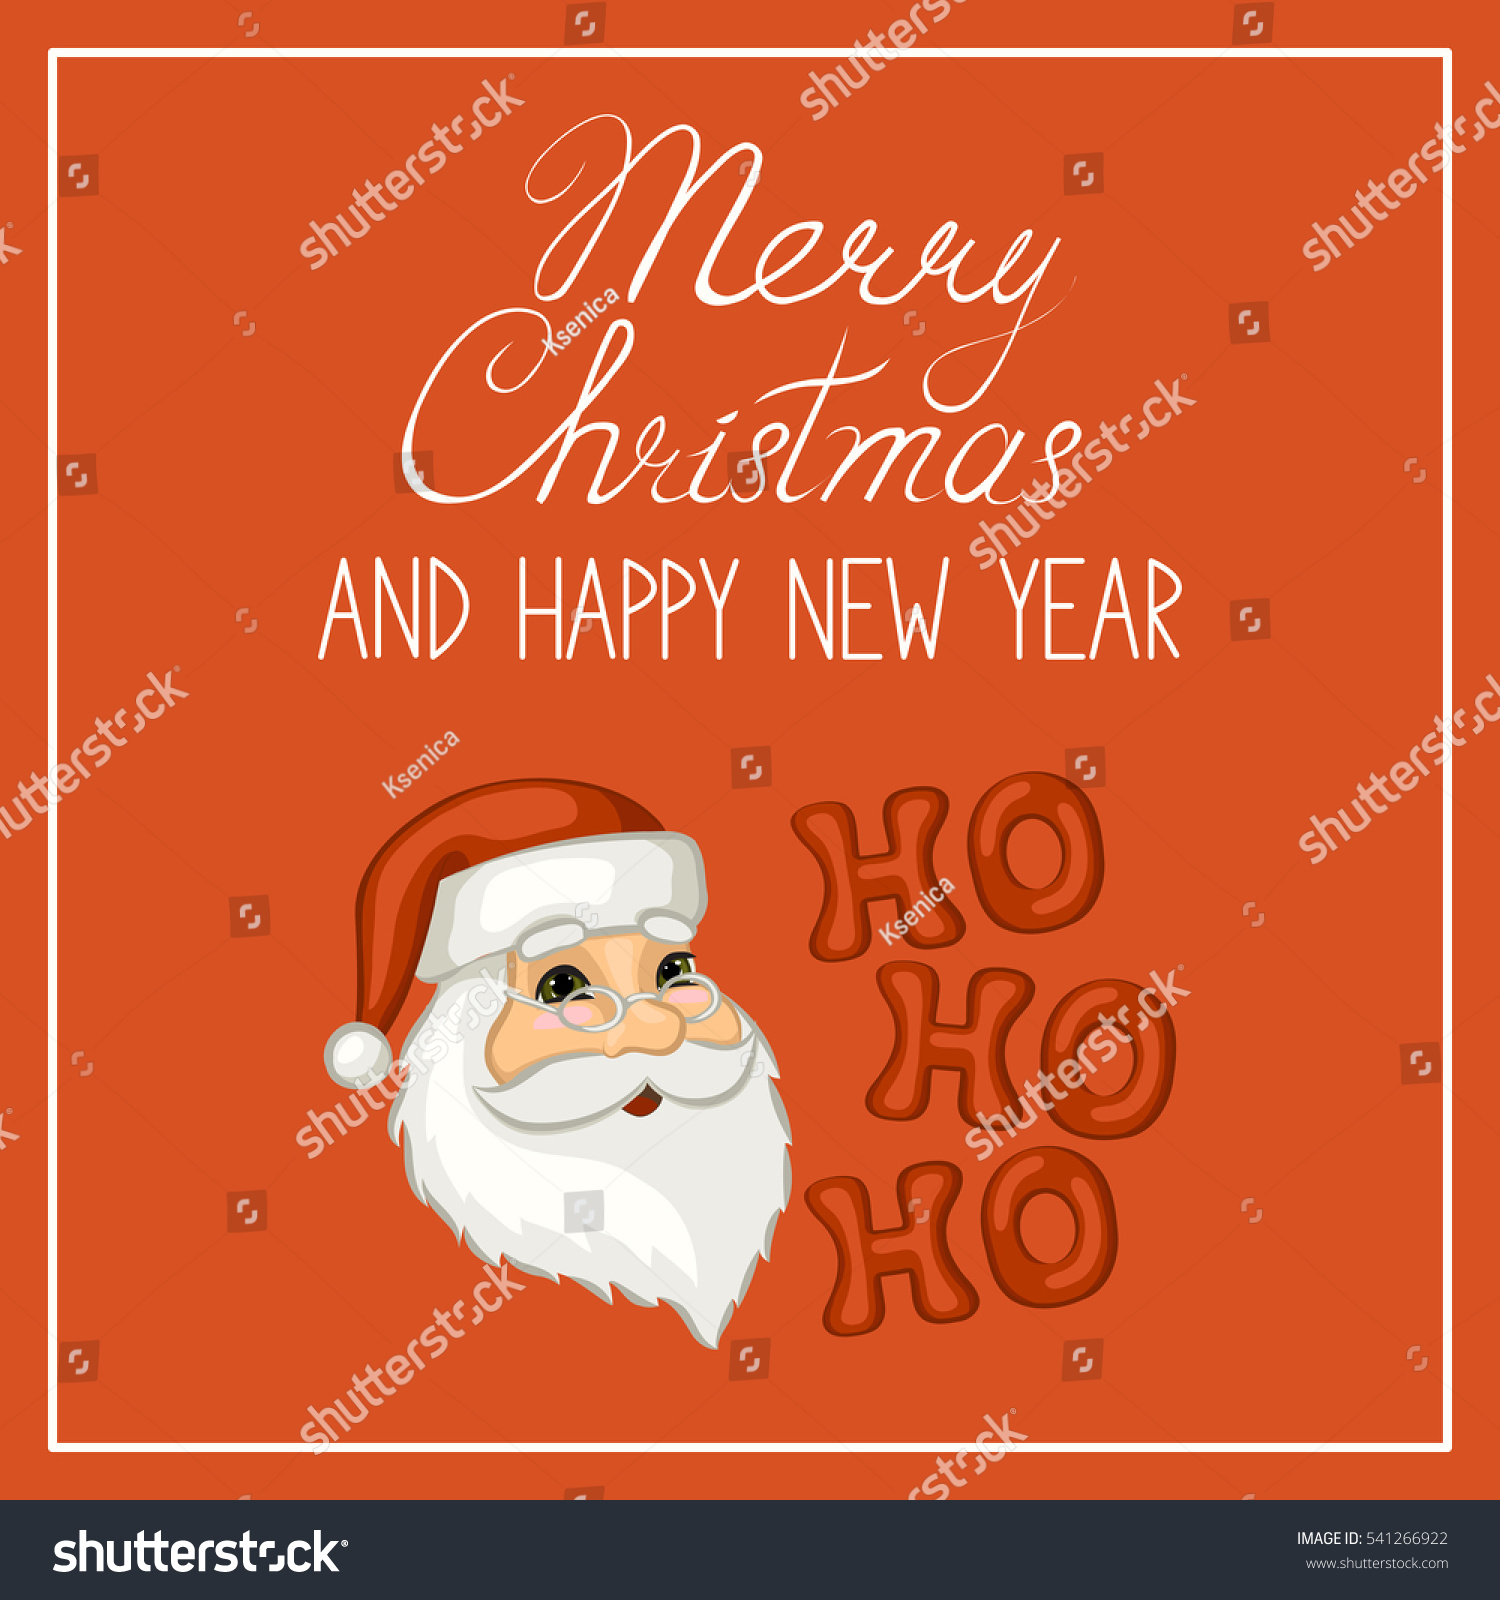 Merry Christmas and happy new year greeting card banner poster Head Santa Claus